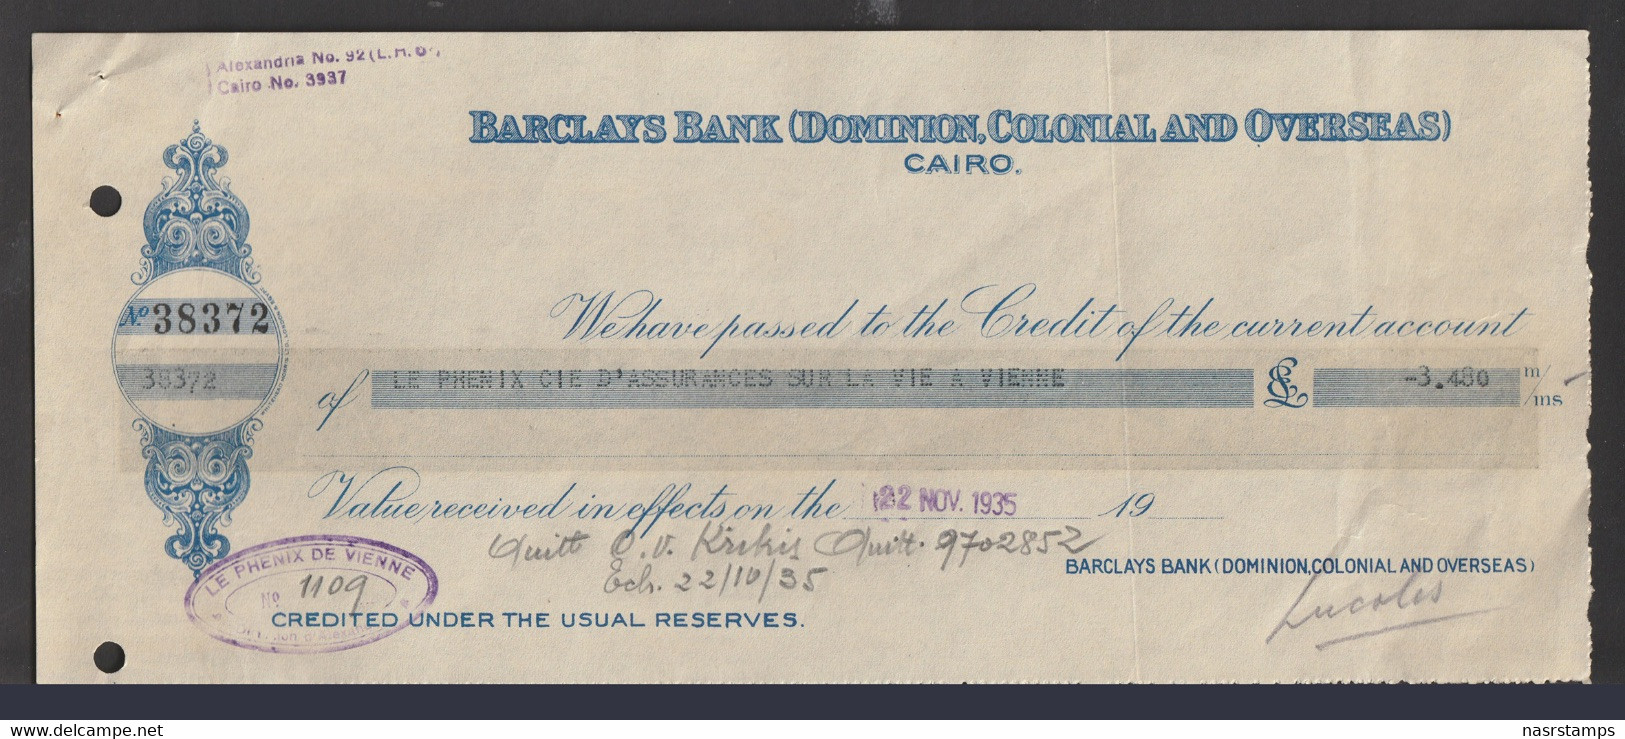 Egypt - 1935 - Vintage Check - Barclays Bank ( DOMINION, COLONIAL AND OVERSEAS - CAIRO ) - [ 5] Collector Series